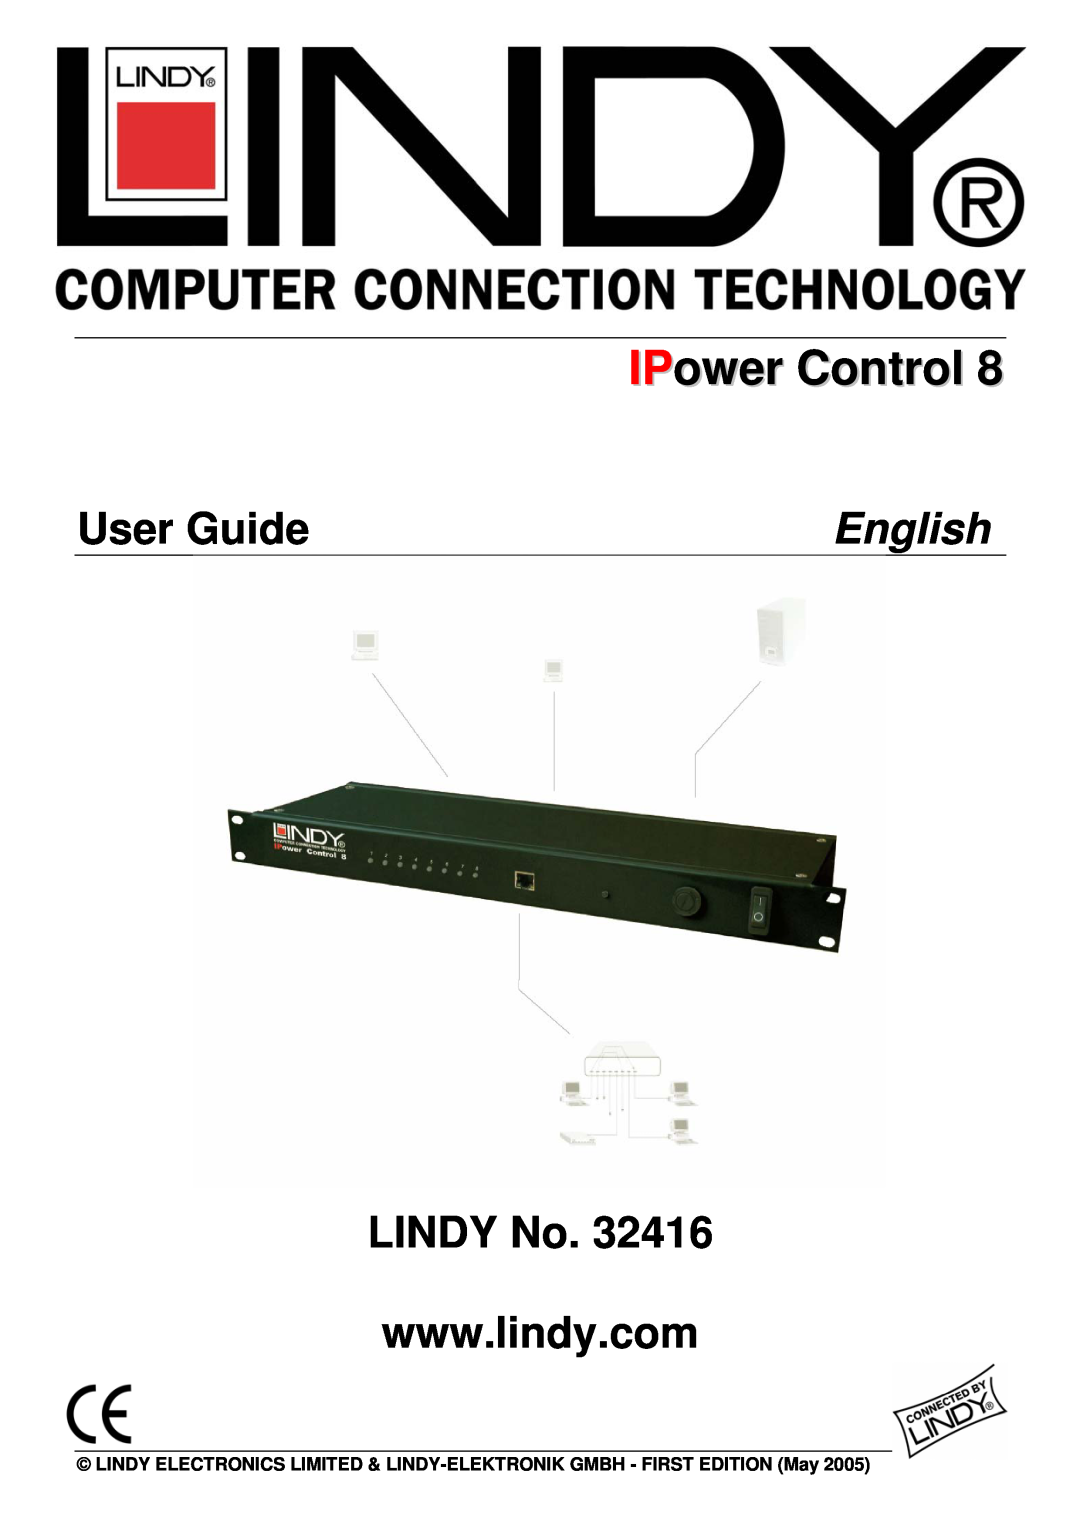 Lindy 32416 manual IPower Control, User Guide, English, LINDY No 